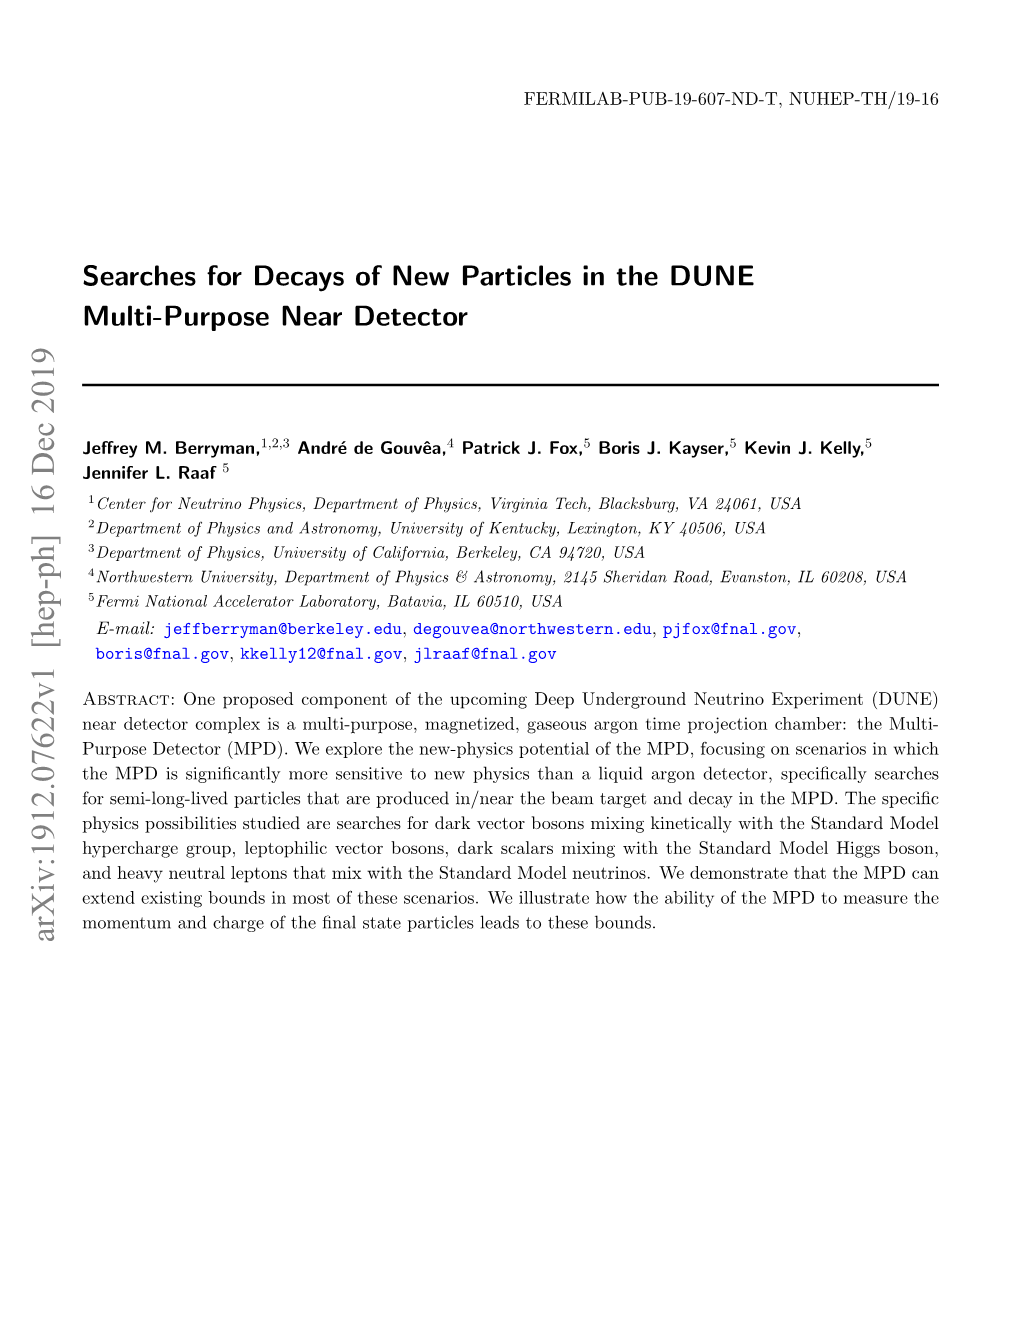 Searches for Decays of New Particles in the DUNE Multi-Purpose Near Detector